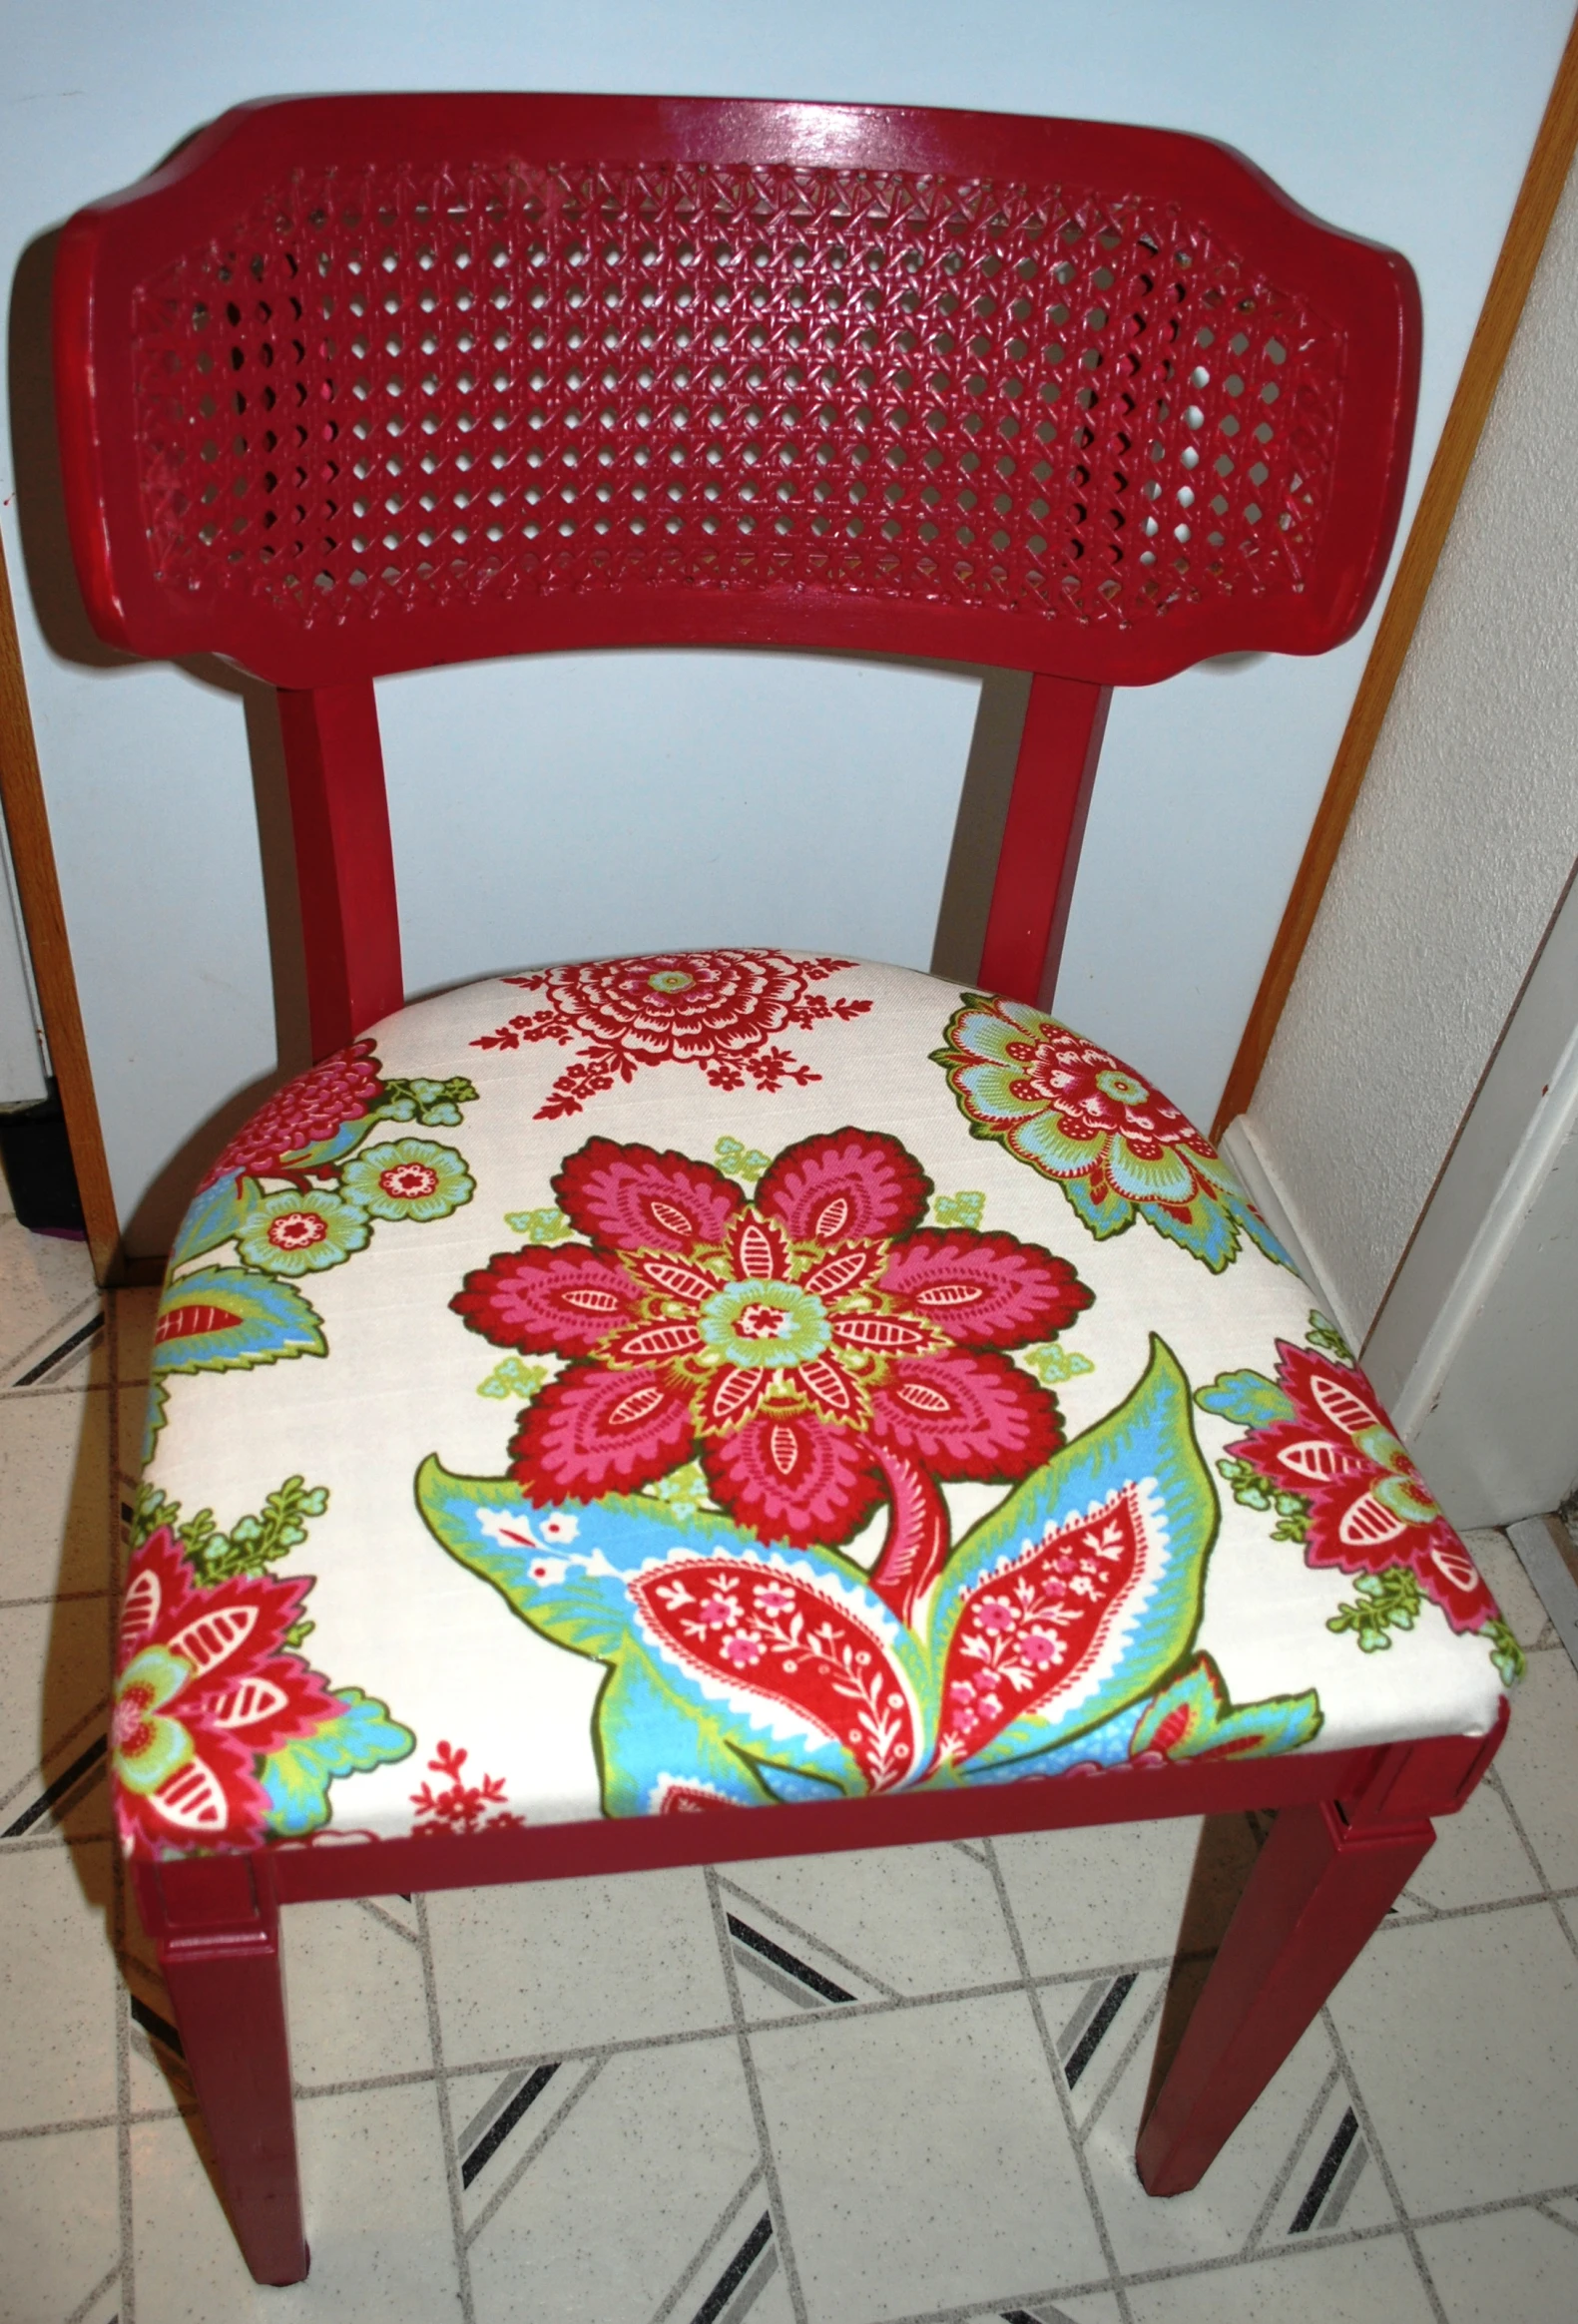 a red chair with a patterned fabric cushion sits on tile